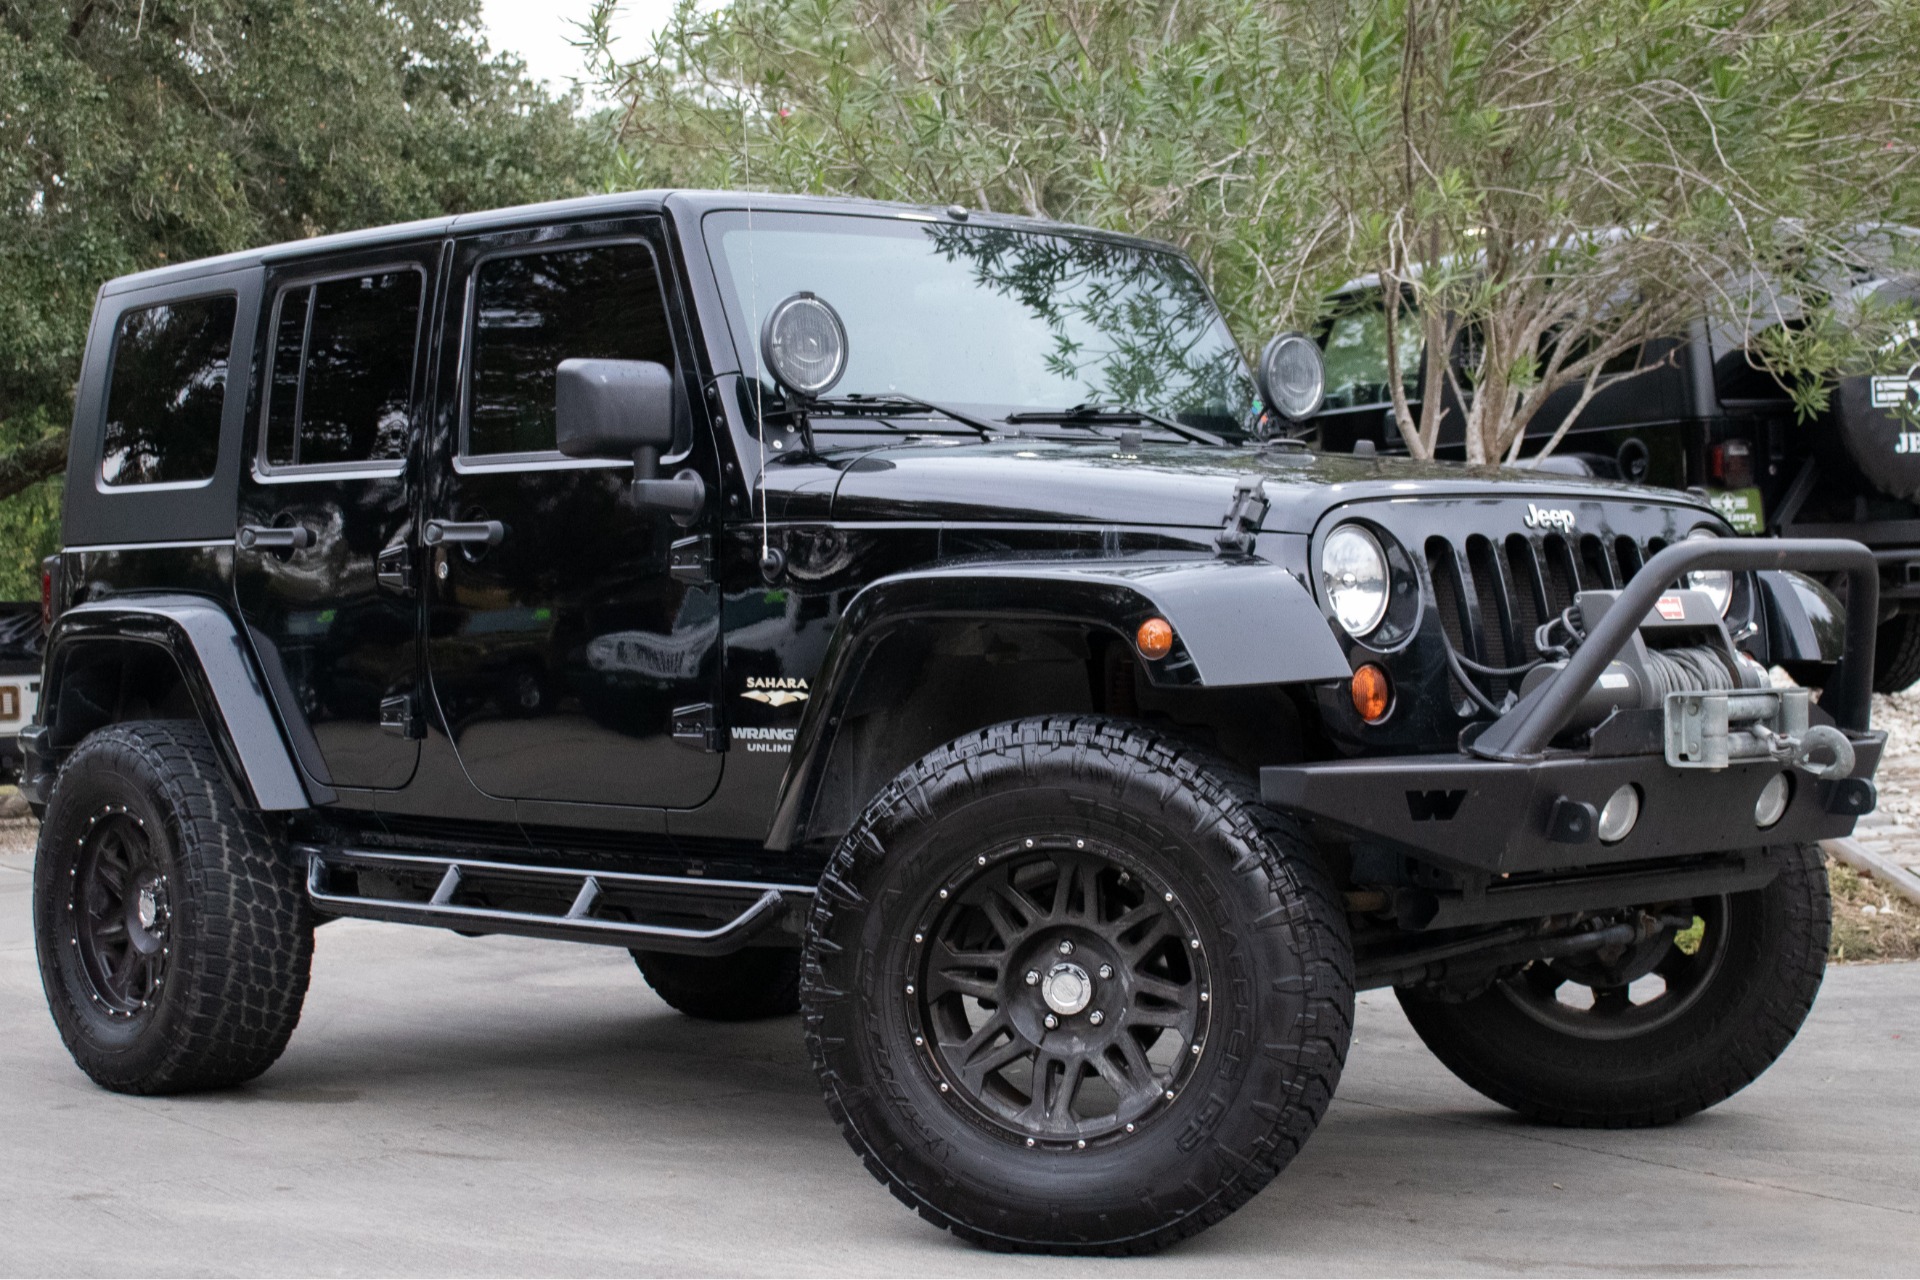 Used 2008 Jeep Wrangler Unlimited Sahara For Sale ($21,995) | Select Jeeps  Inc. Stock #536754